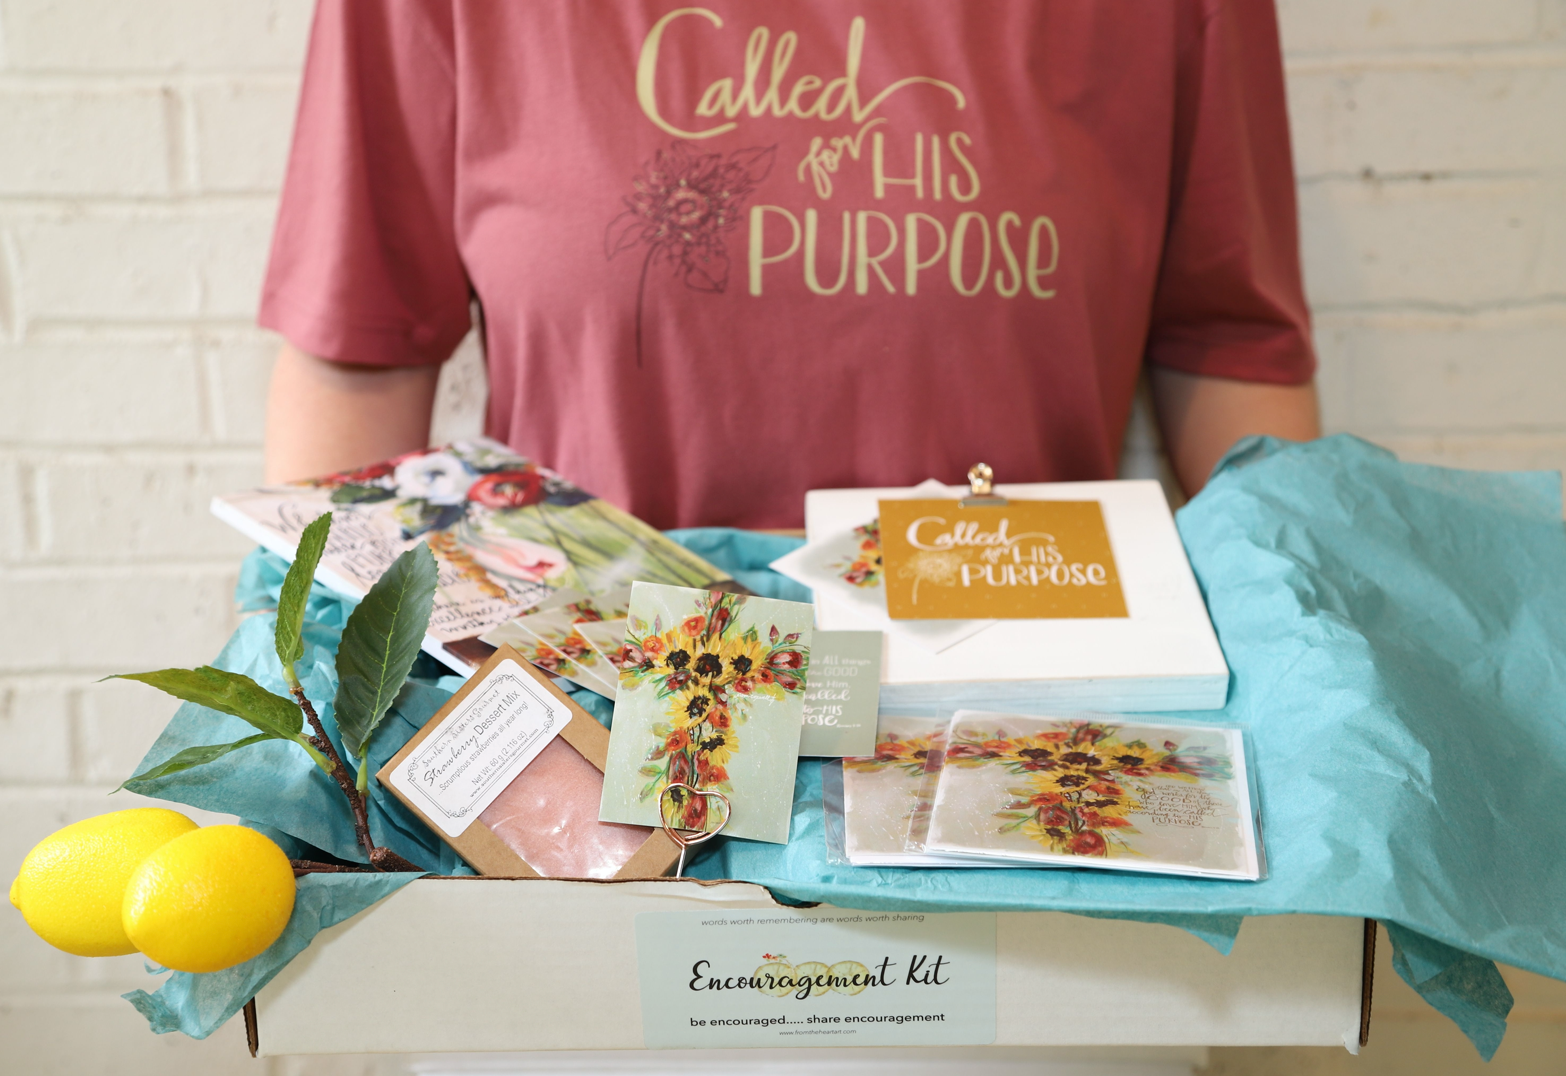 Story Behind the Art: What's Inside August's "Lemonade Reminders" Christian Subscription Box for Women (+ Why I Chose It)